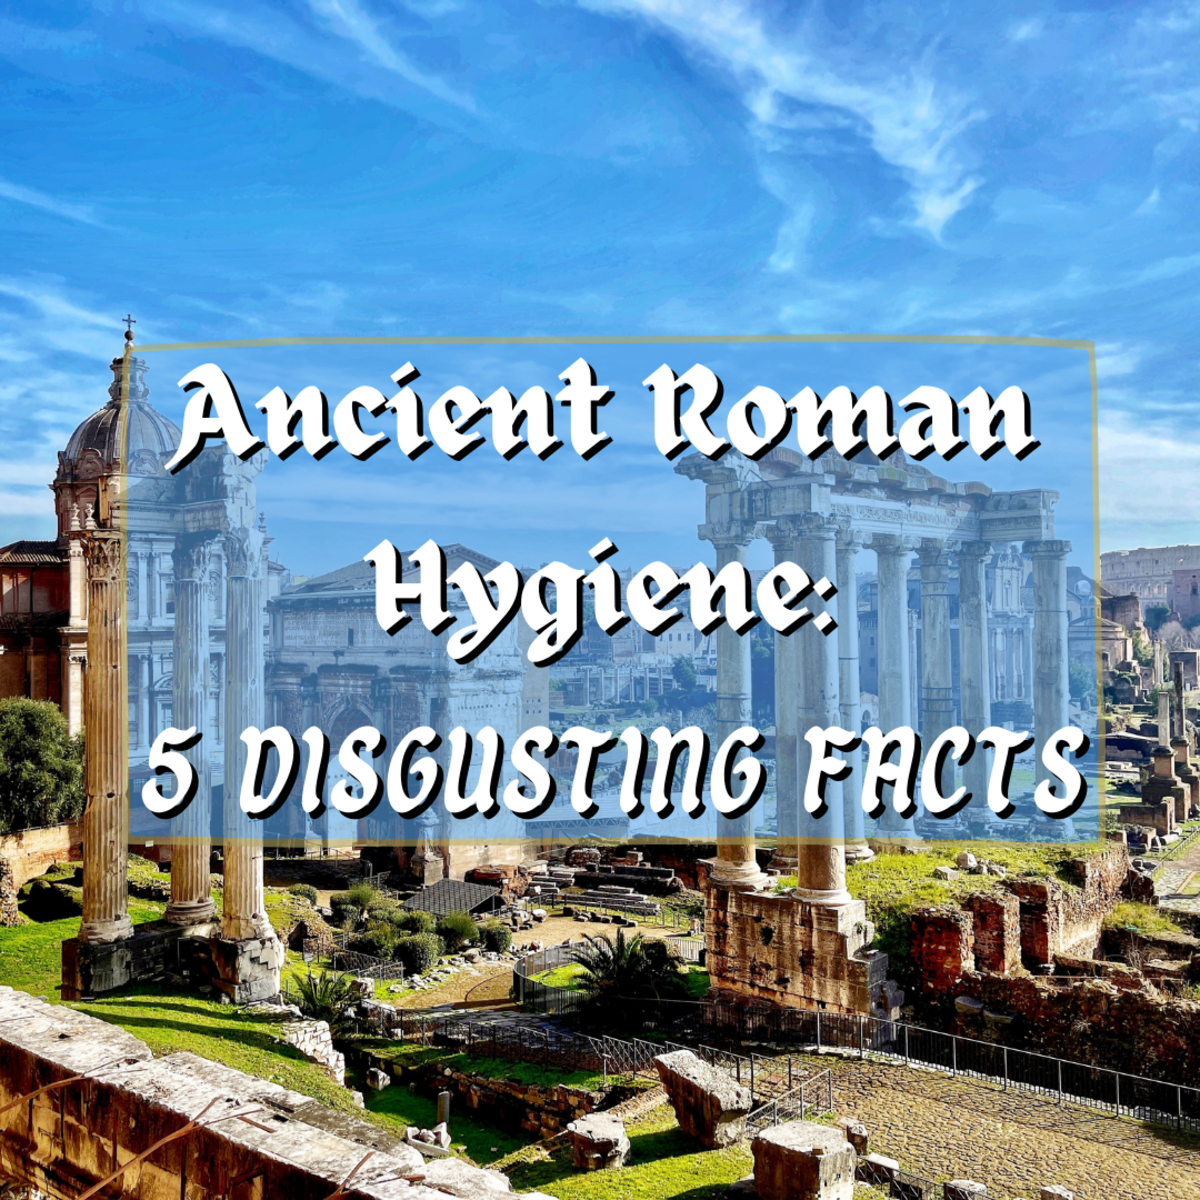 Read on to learn some of the most disgusting hygienic habits of the ancient Romans, from how they cleaned their butts to their use of gladiatorial blood as medicine.